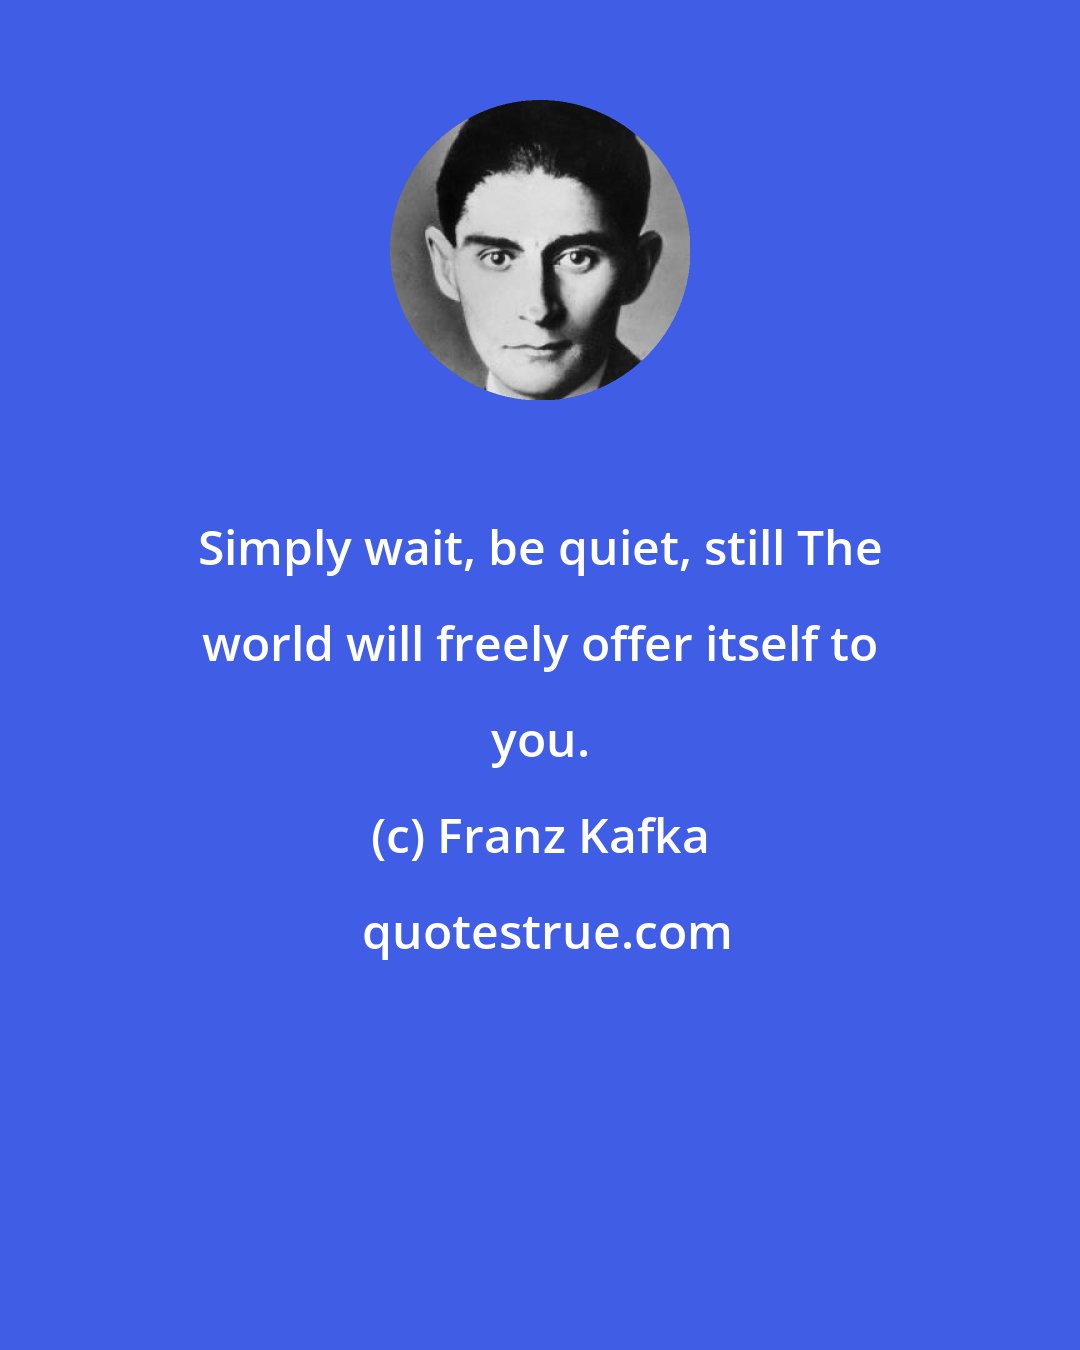 Franz Kafka: Simply wait, be quiet, still The world will freely offer itself to you.